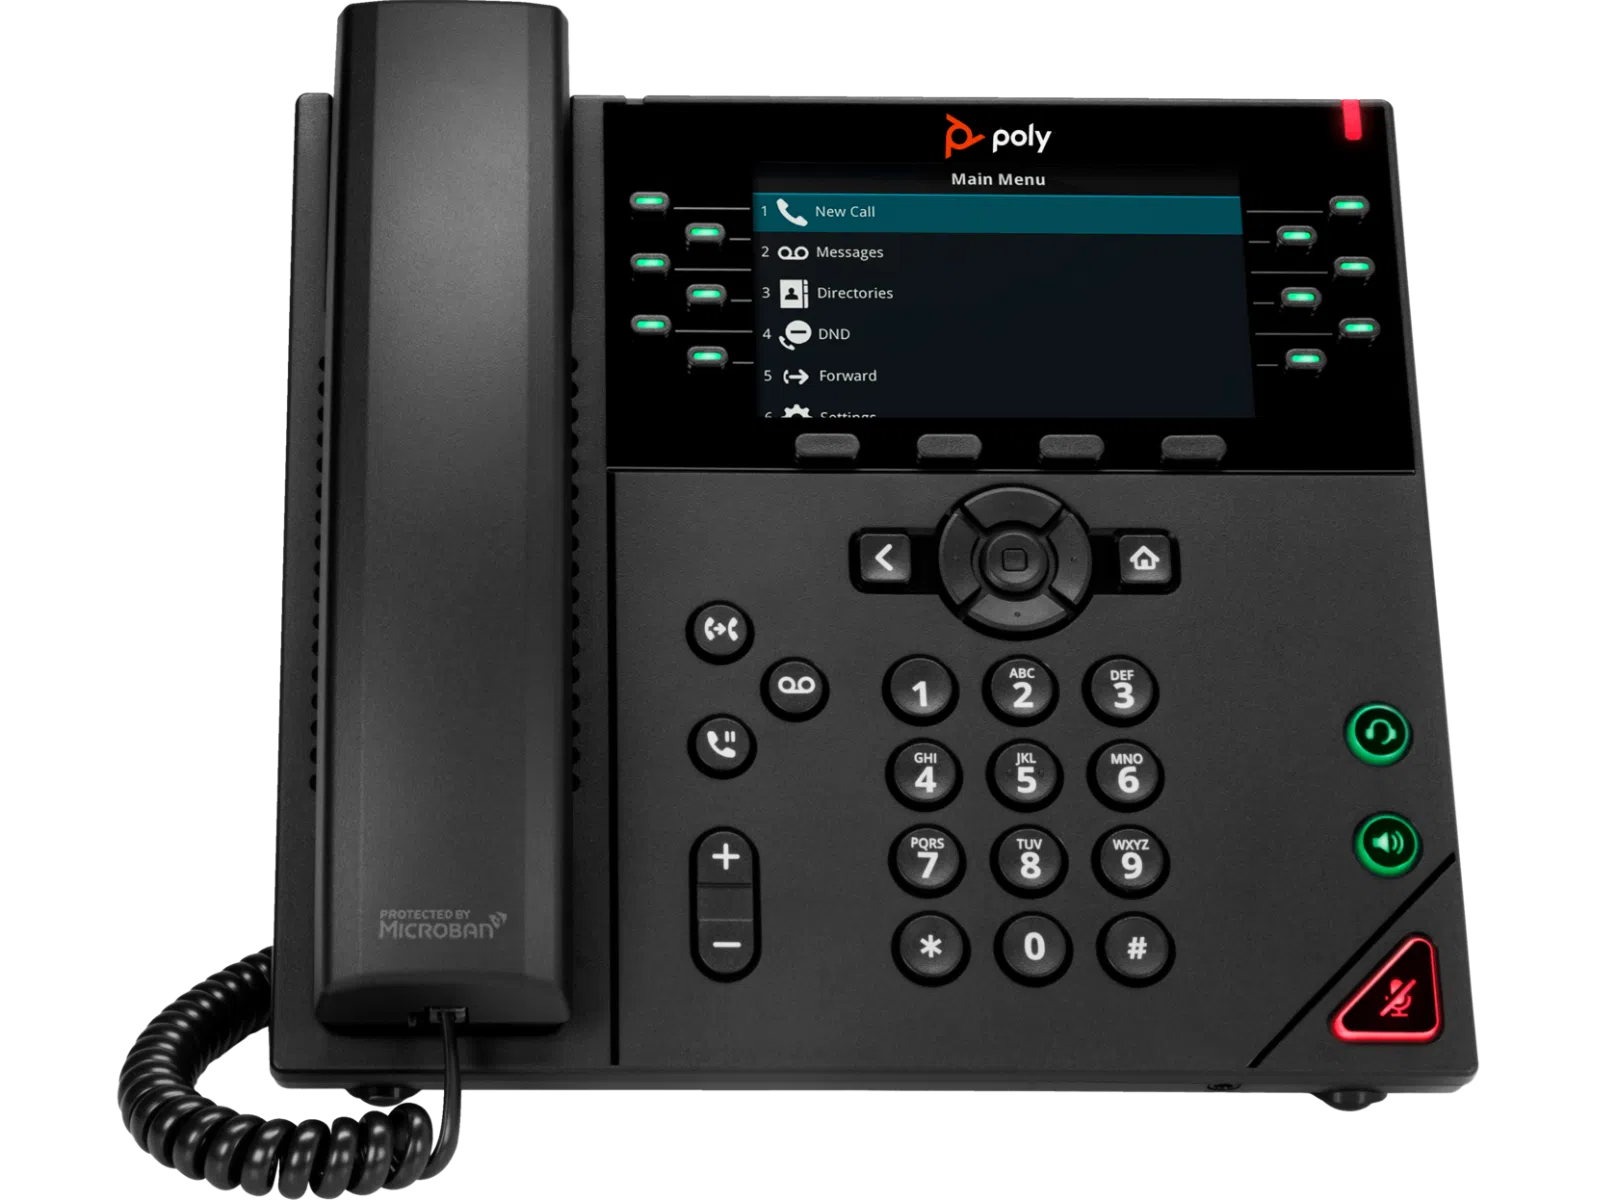 What is the count of soft keys on the Poly VVX 450 12-Line High-end Color IP Desktop Phone?